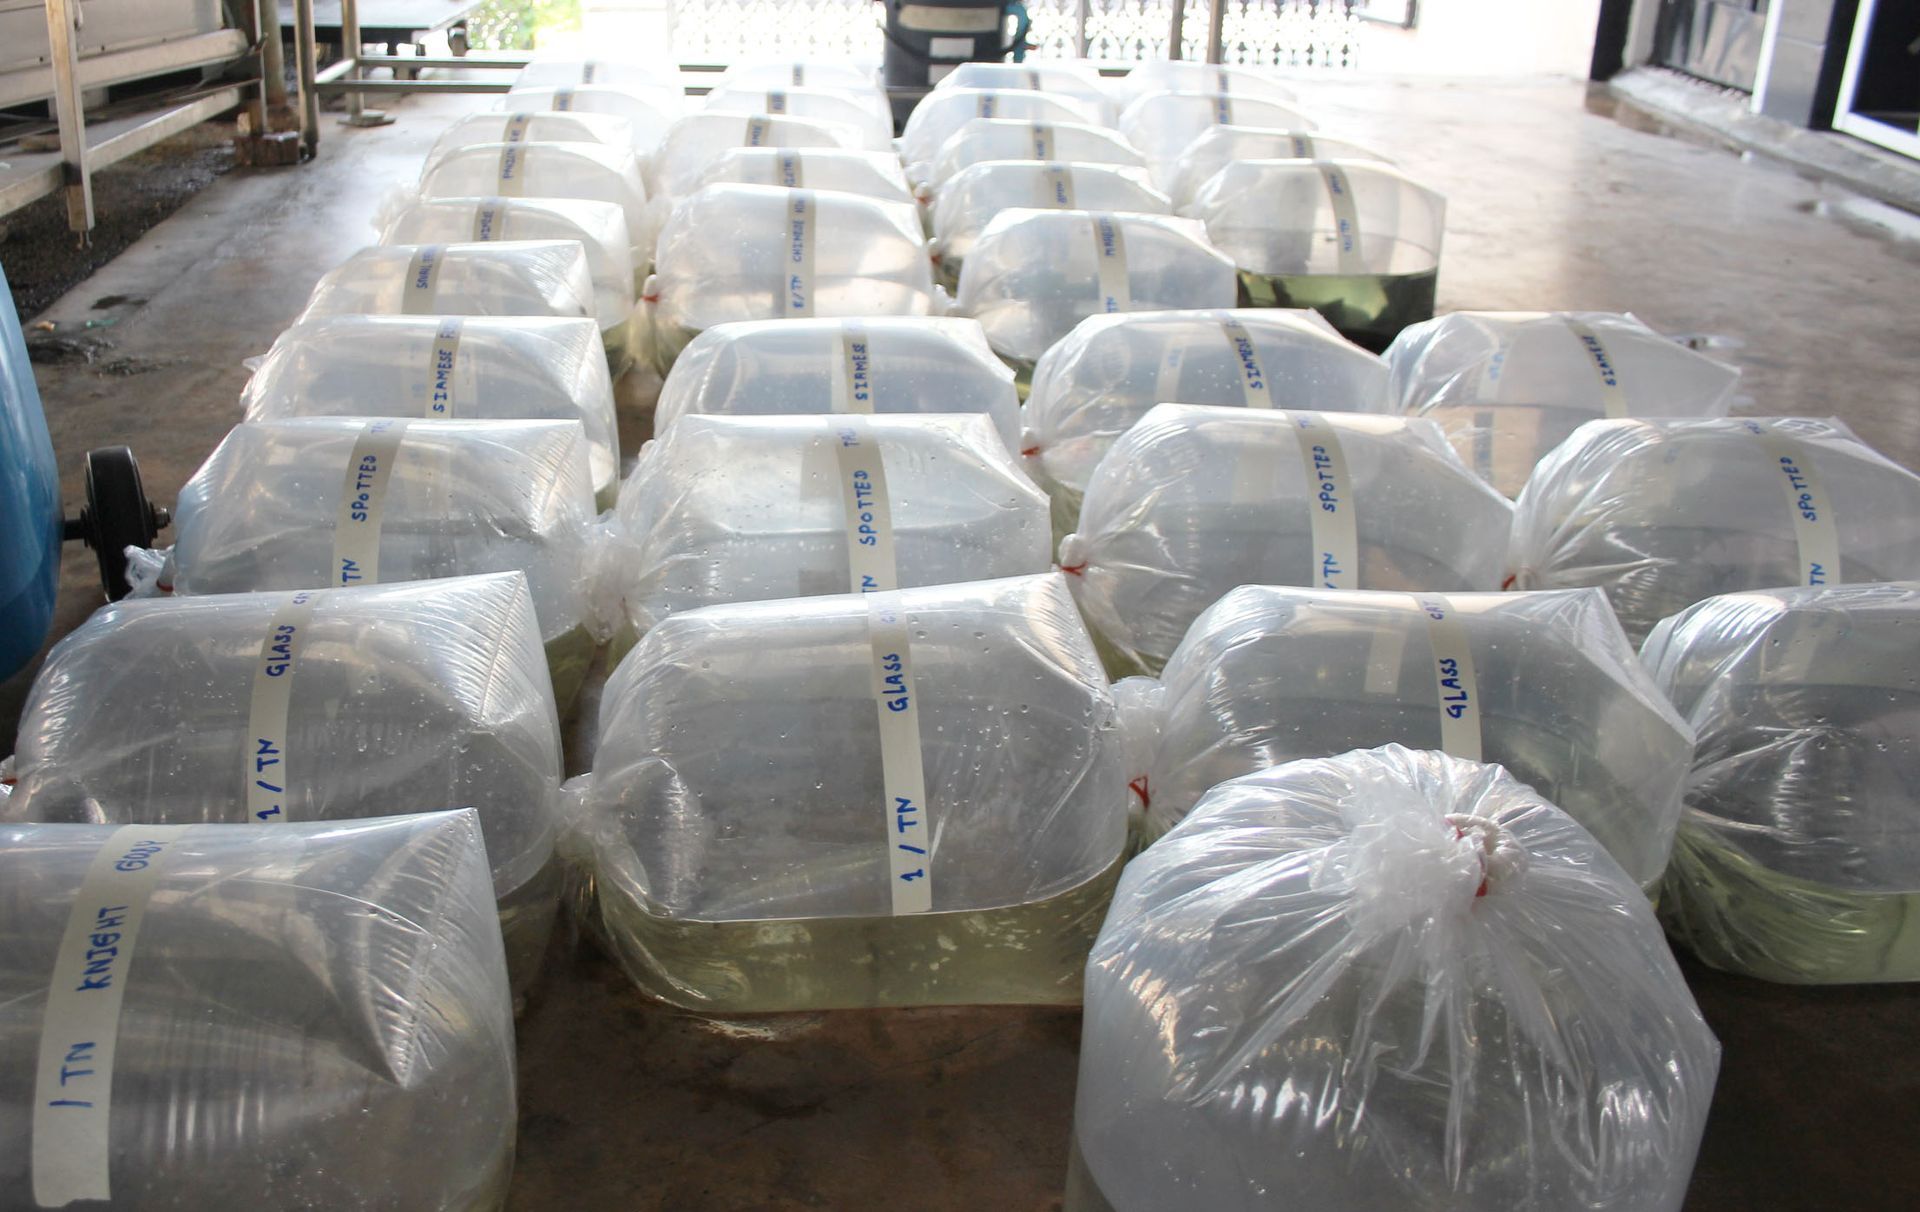 Samples bagged for testing